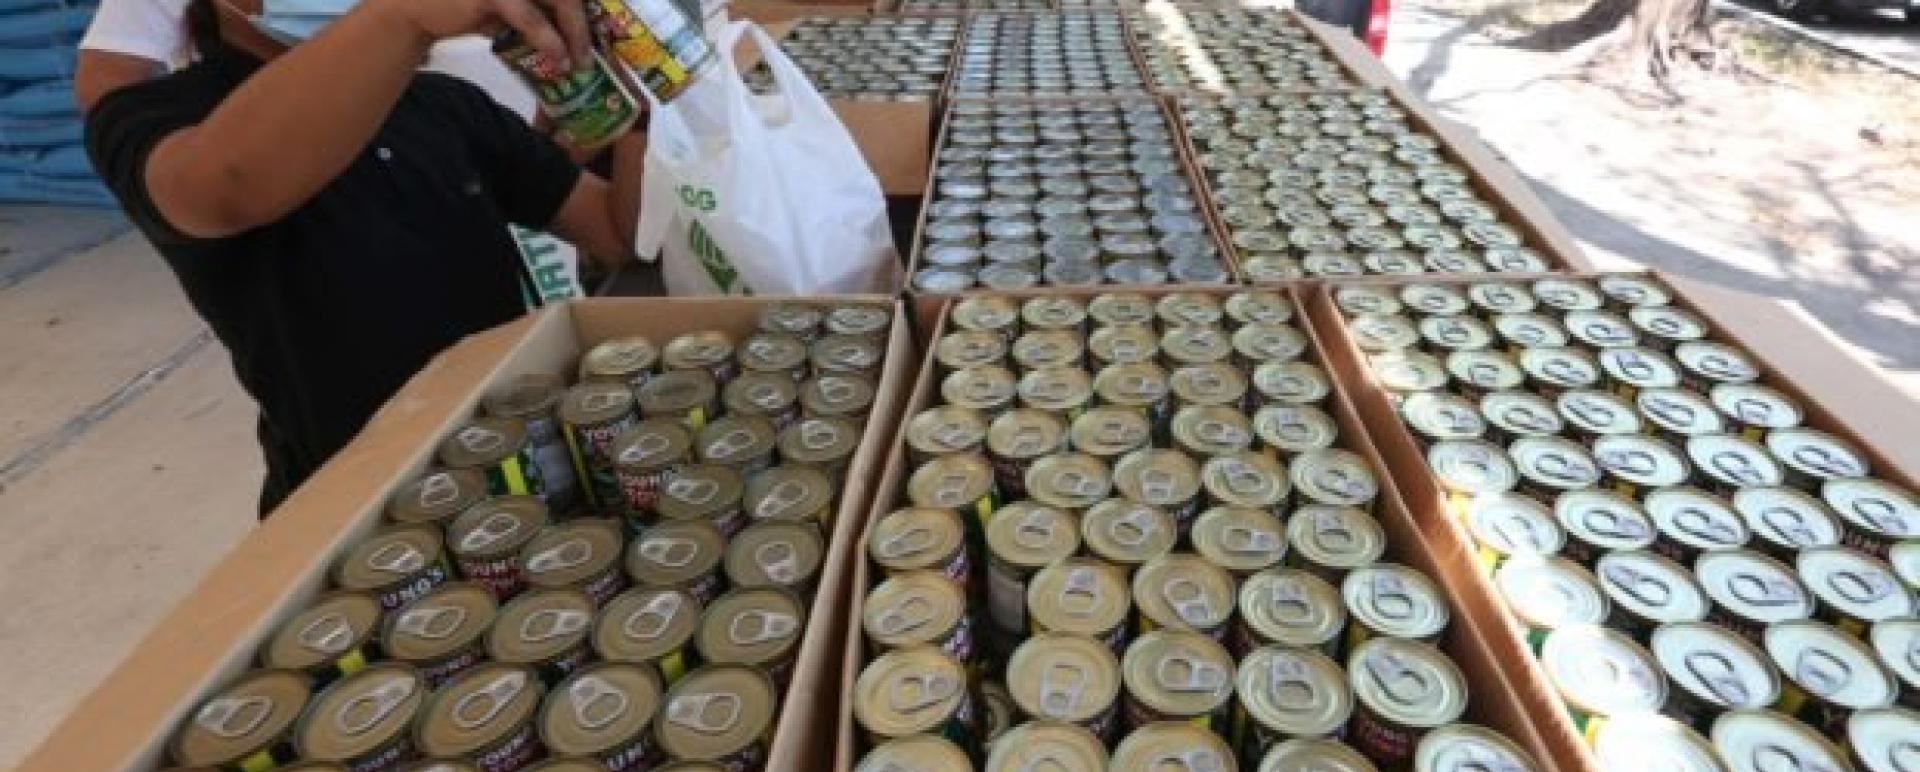  DONATIONS Volunteers in Parañaque City pack canned sardines for delivery to residents who cannot leave their homes because of the quarantine imposed on the entire island of Luzon. —MARIANNE BERMUDEZ